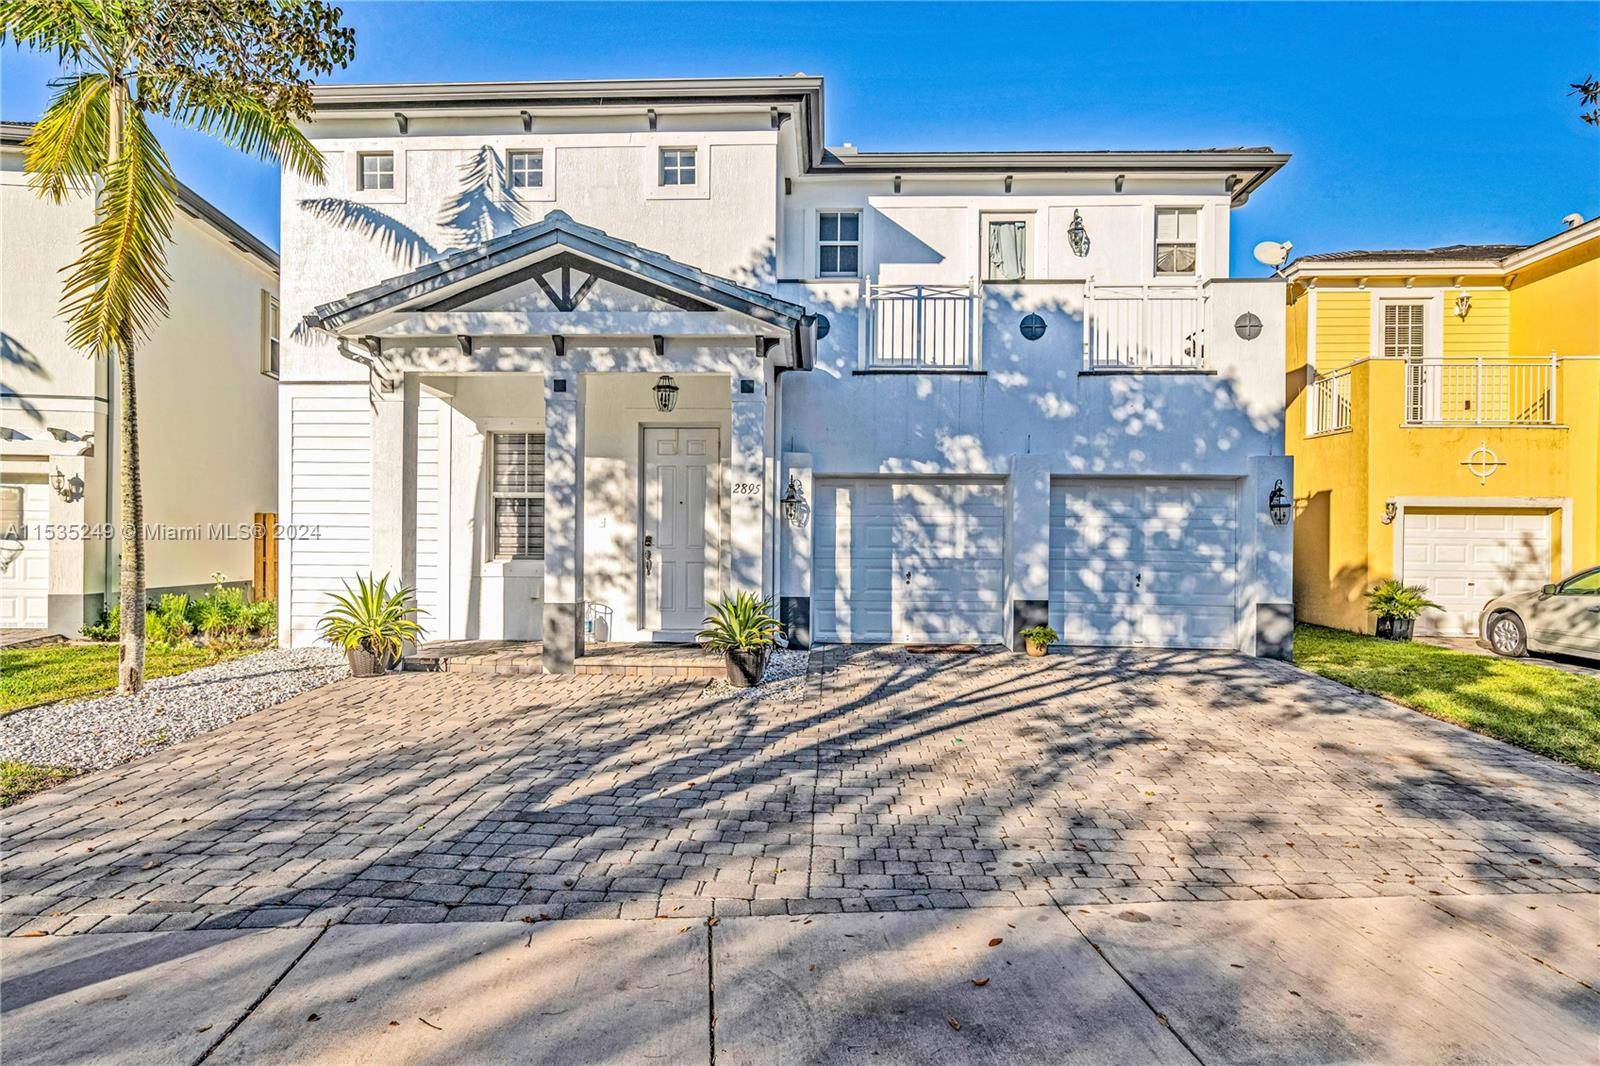 Charming Home for Sale Perfect Blend of Comfort and Elegance Discover your dream home in a desirable neighborhood, featuring 4 spacious bedrooms, 3 modern bathrooms, and an array of luxurious ...